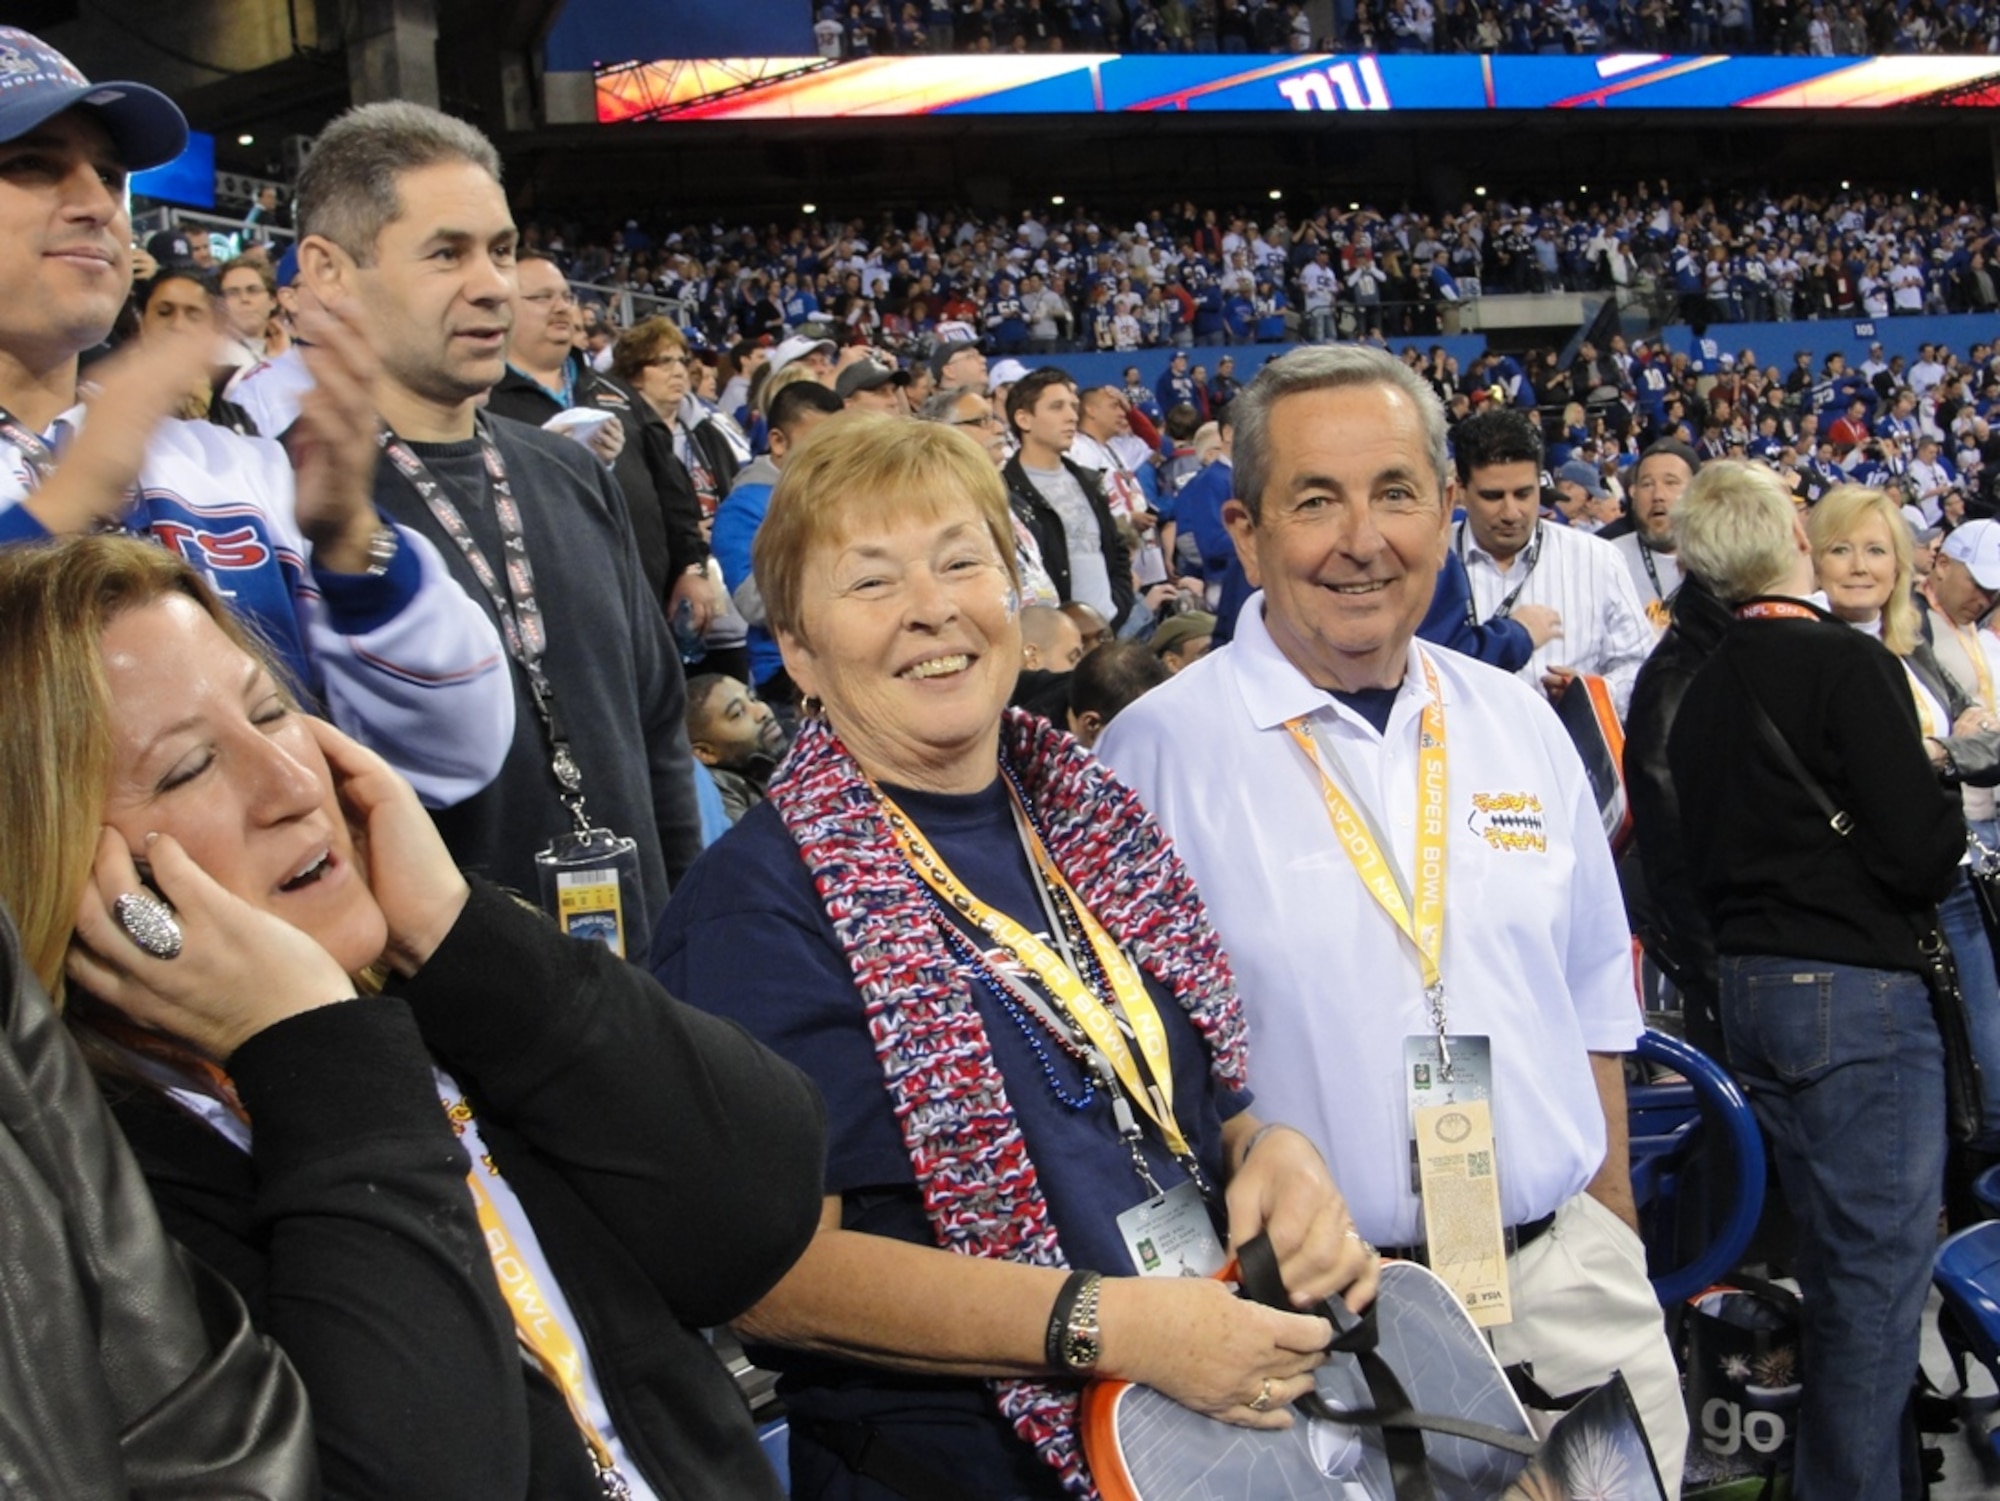 Retired Master Sgt. Jim Lynch and his wife Pat of Patrick Air Force Base, Fla., pose for a photo from the stands of Lucas Oil Stadium during Super Bowl XLVI Feb. 5 in Indianapolis. Lynch was one of four Air Force club members who participated in the annual Football Frenzy promotion and won a four-day trip to the sporting event. (Courtesy photo)